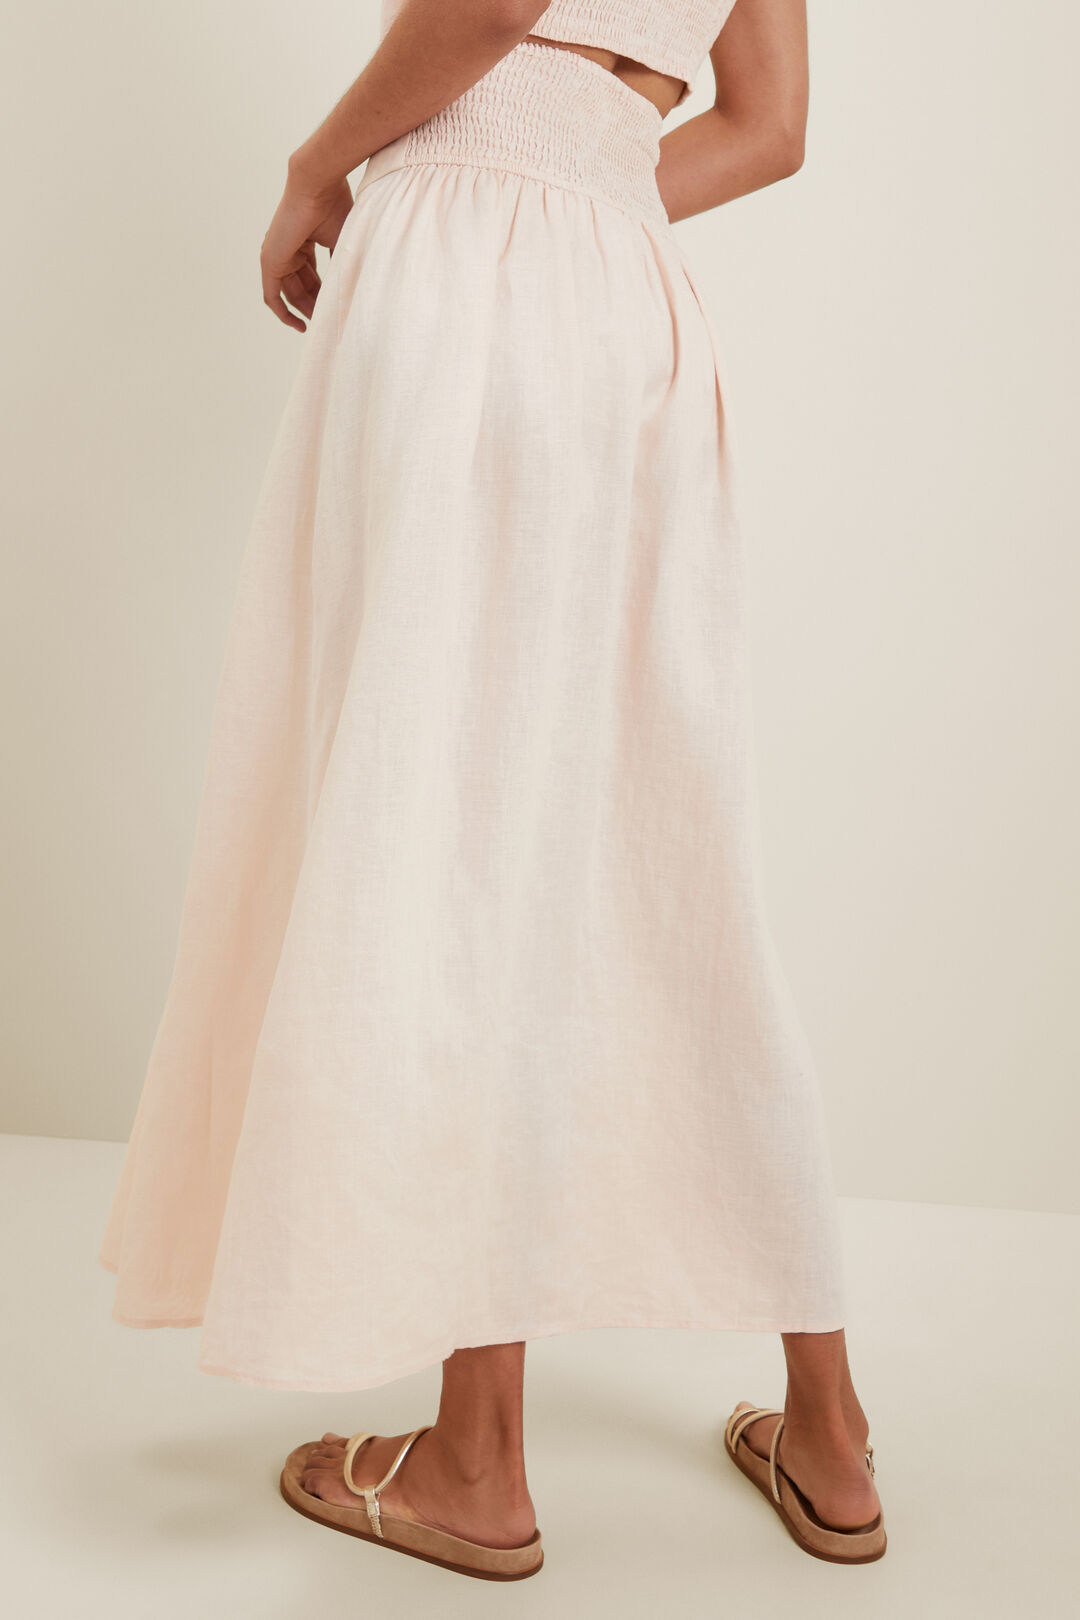 Linen Gathered Maxi Skirt  Pale Blossom  hi-res